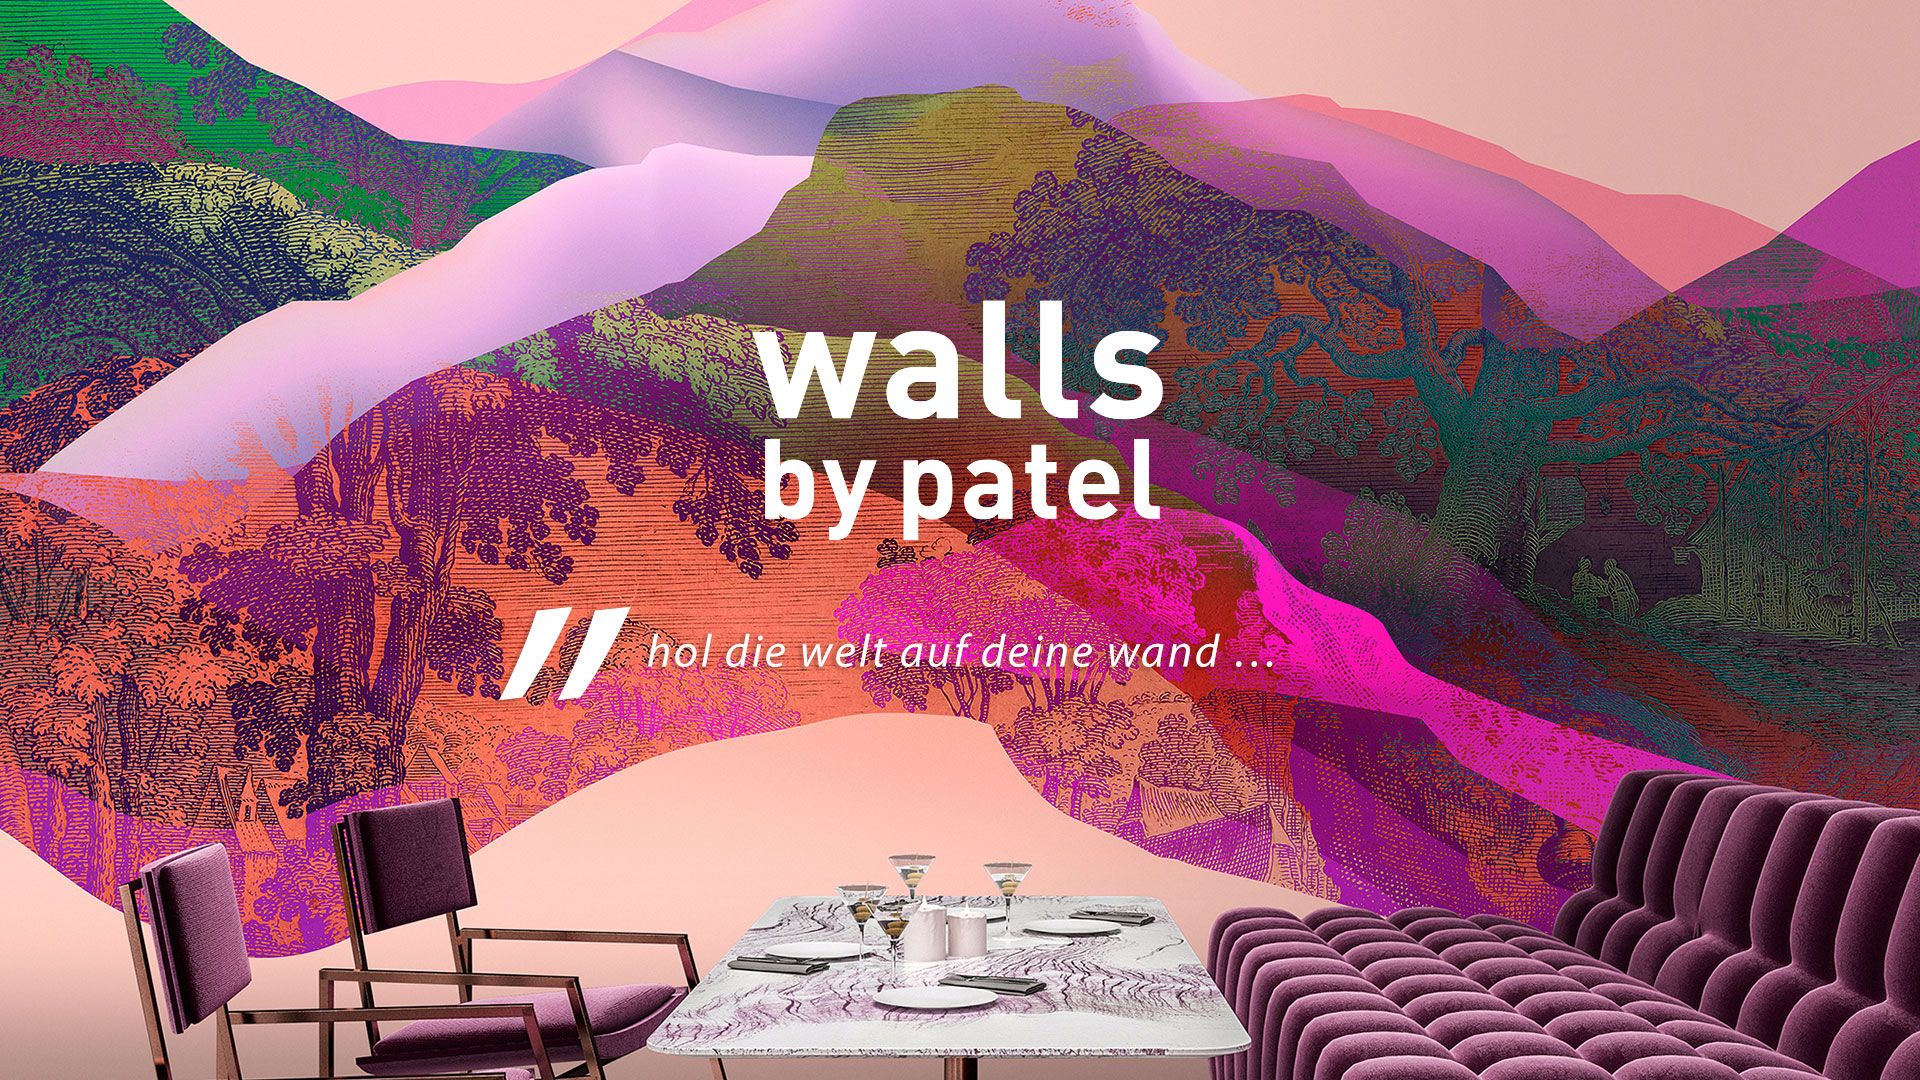 Walls by Patel photo mural